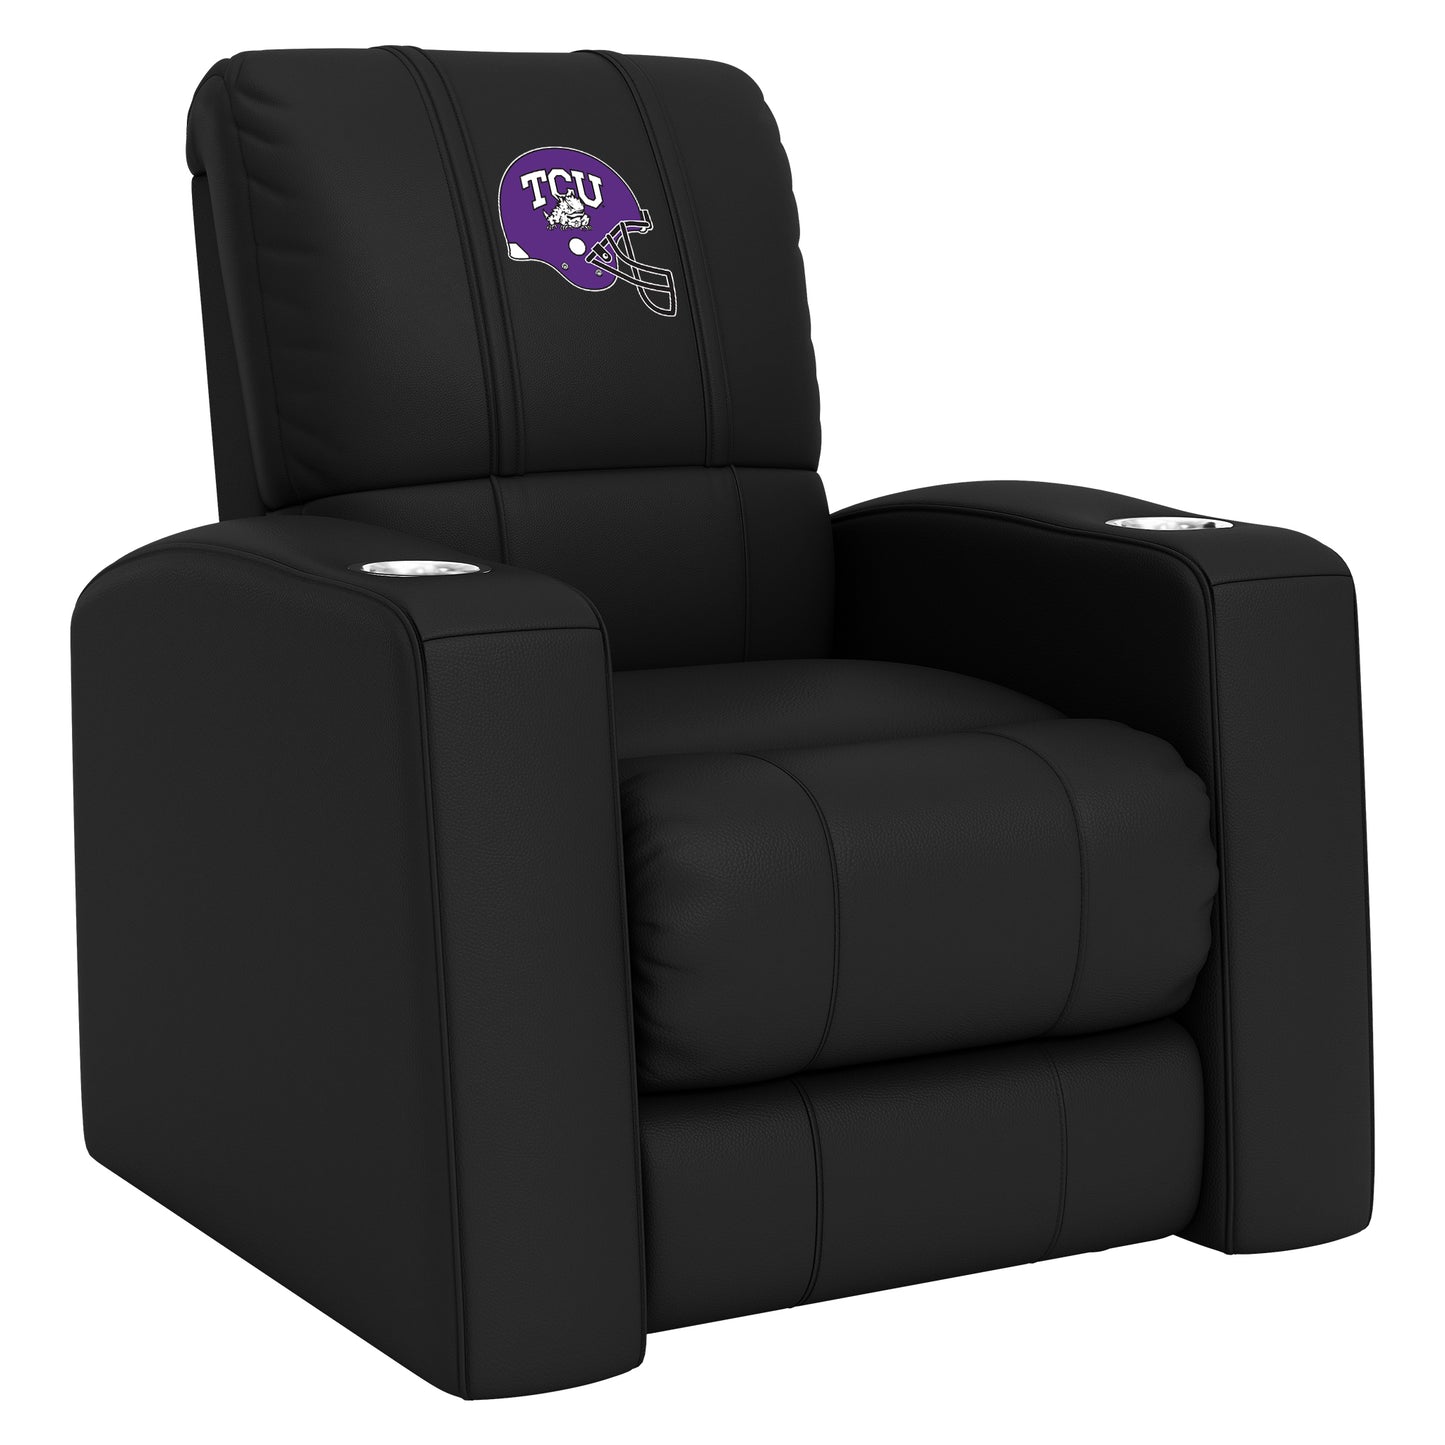 Relax Home Theater Recliner with TCU Horned Frogs Alternate